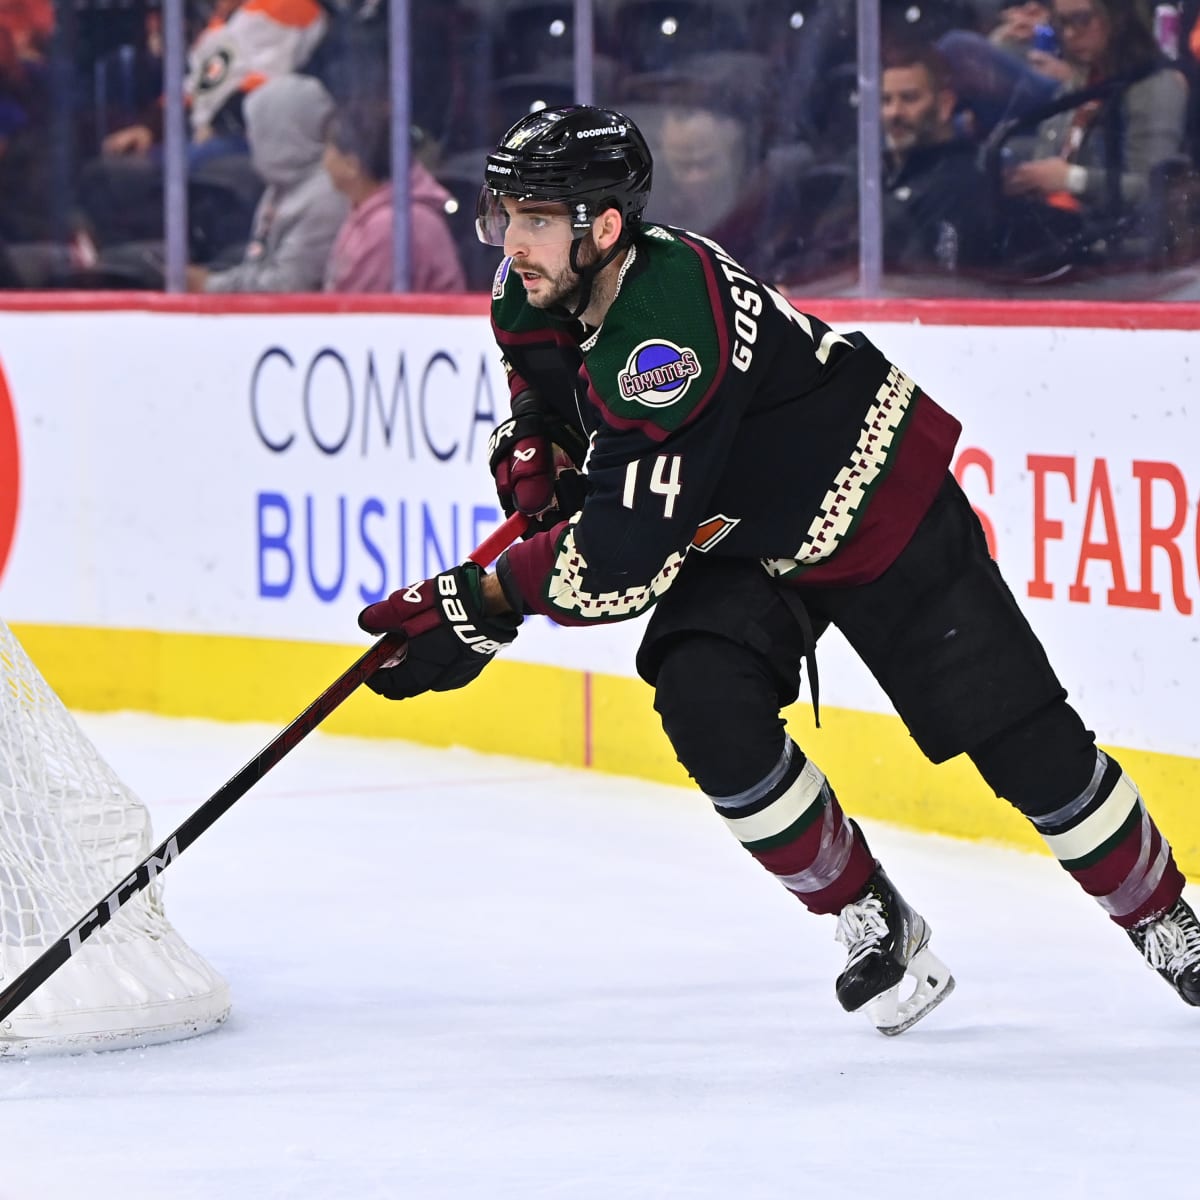 Yotes Trade Central on X: It appears this is close to what the